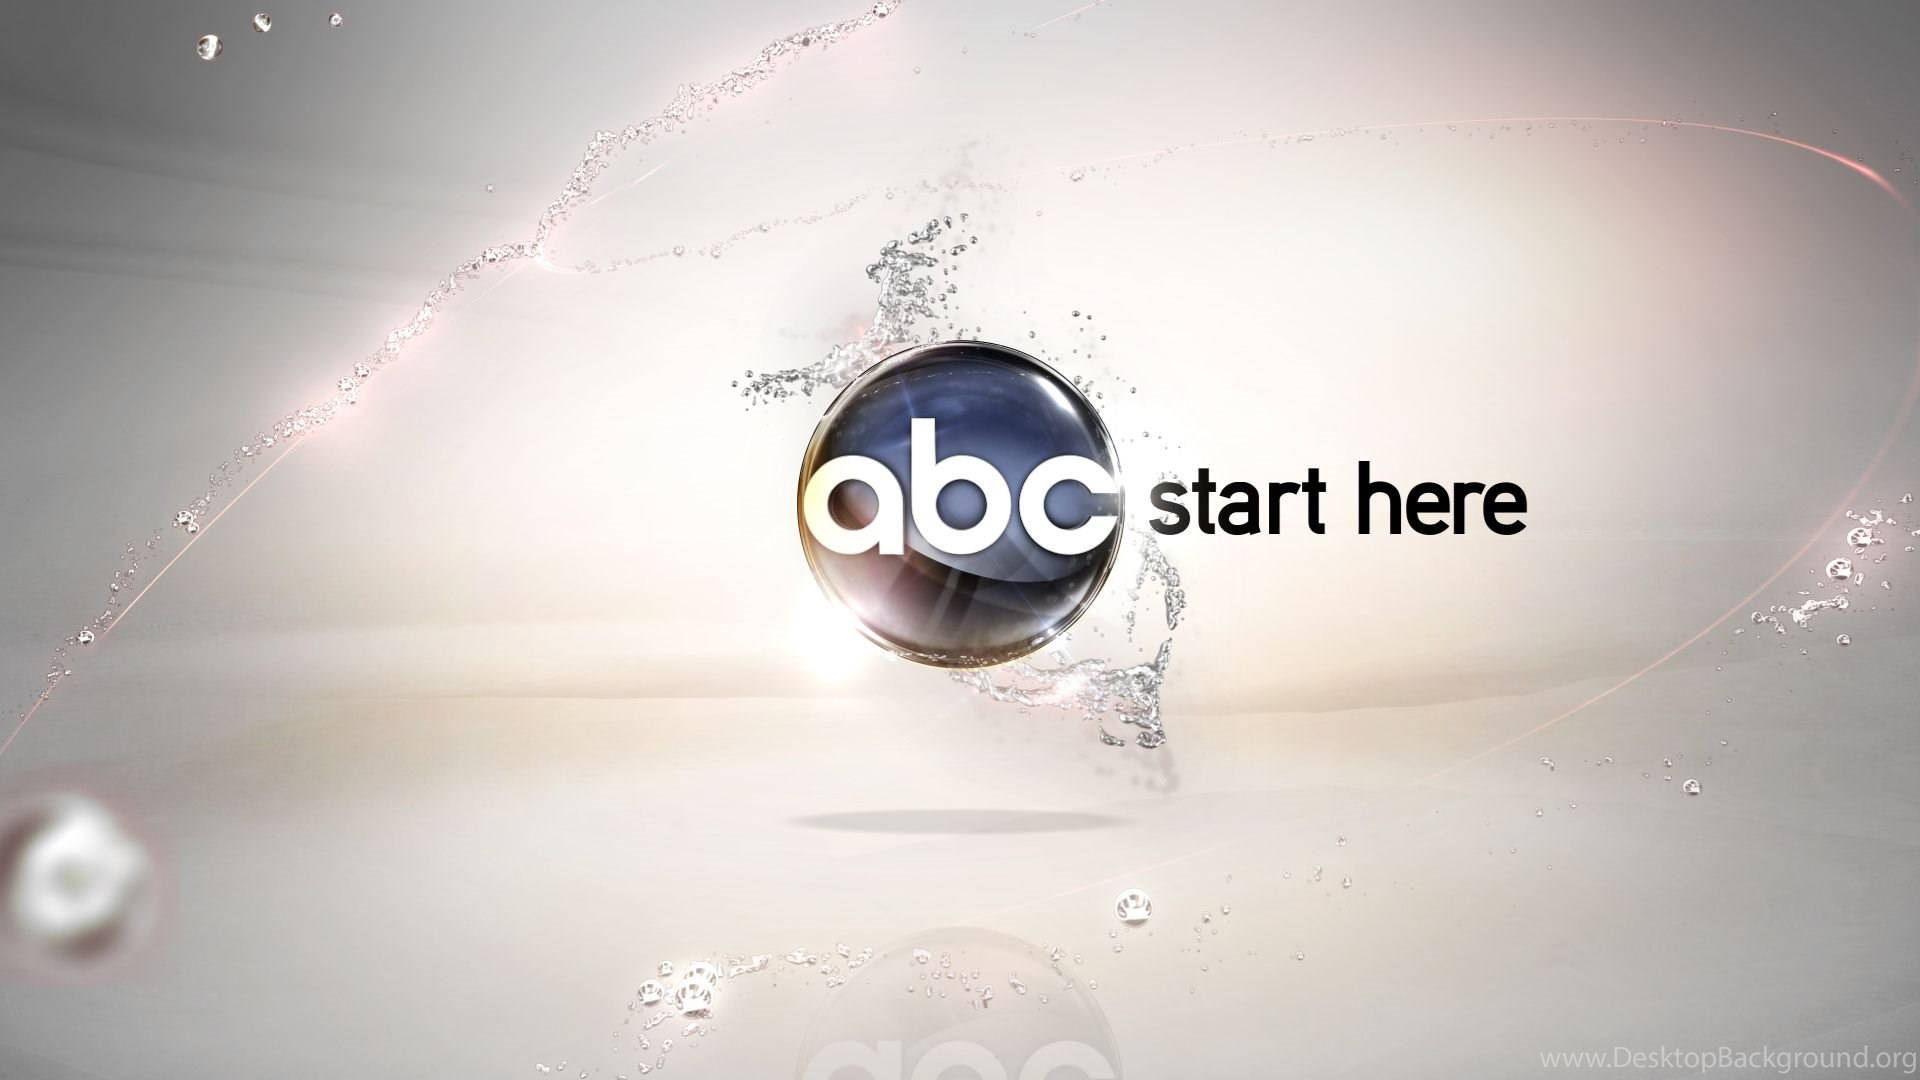 Vibrant Abc Logo Immersed In A Water Splash Effect